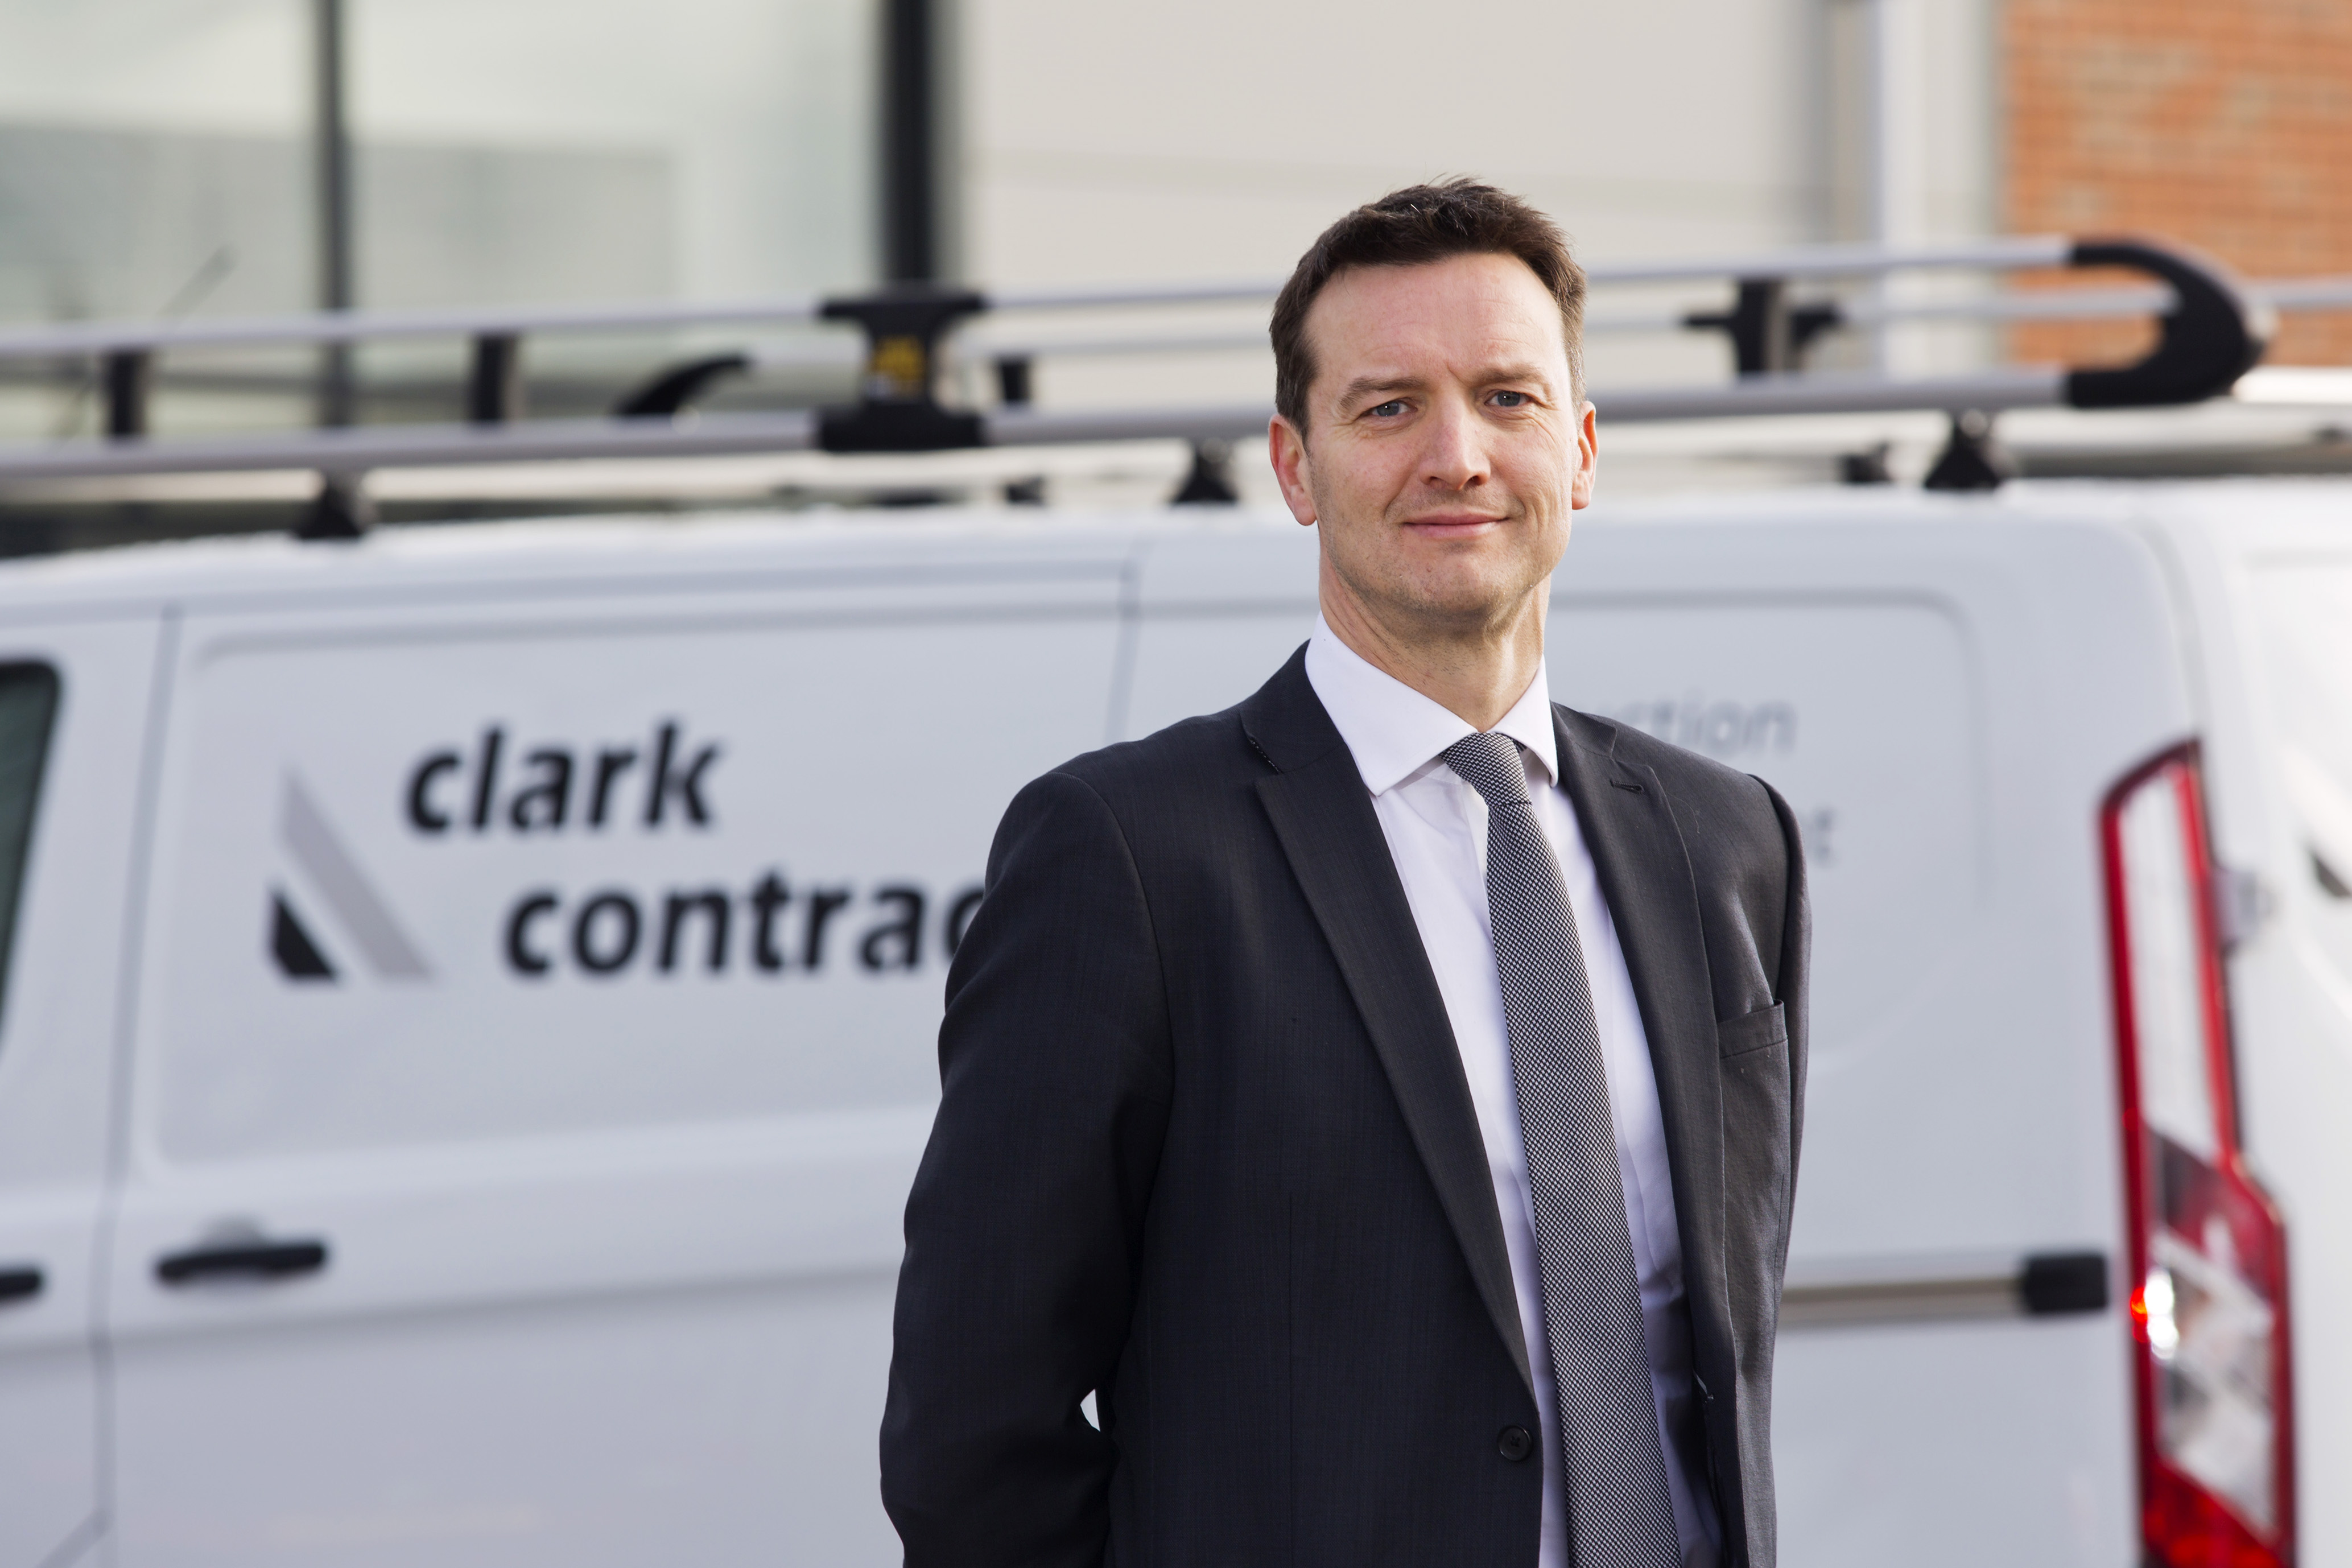 Gordon Cunningham celebrates two decades at Clark Contracts